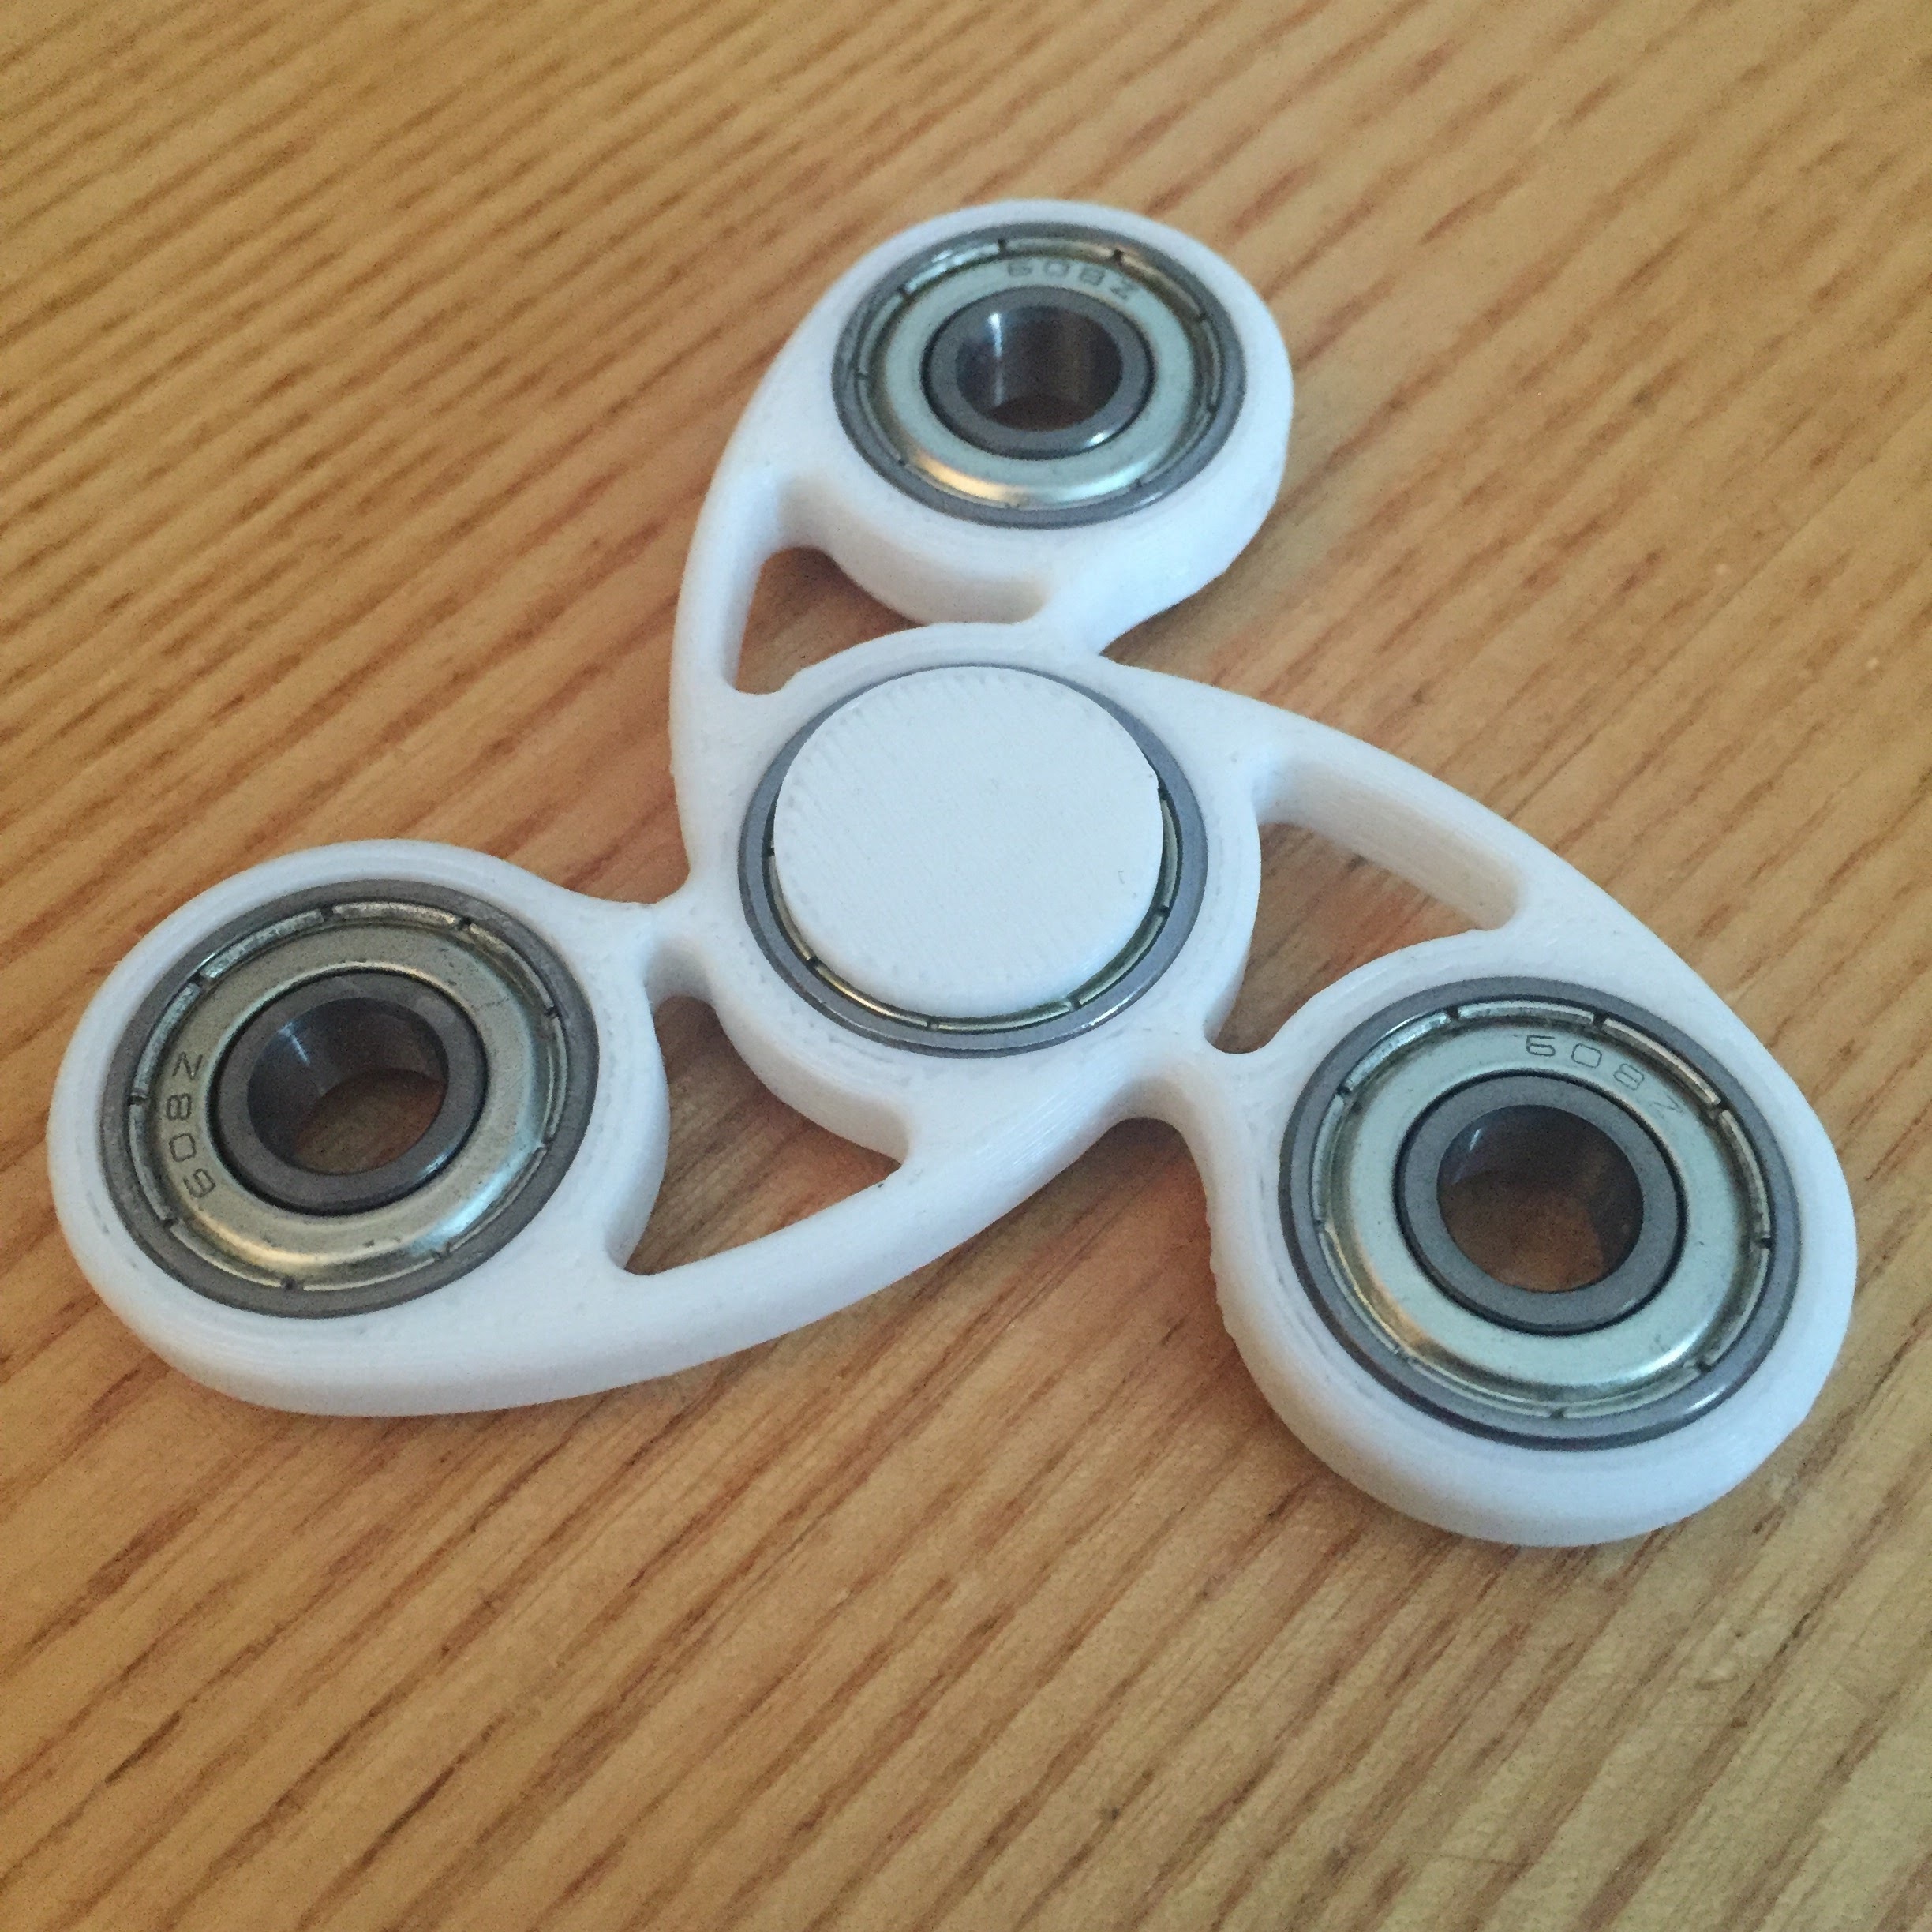 3d printed spinners